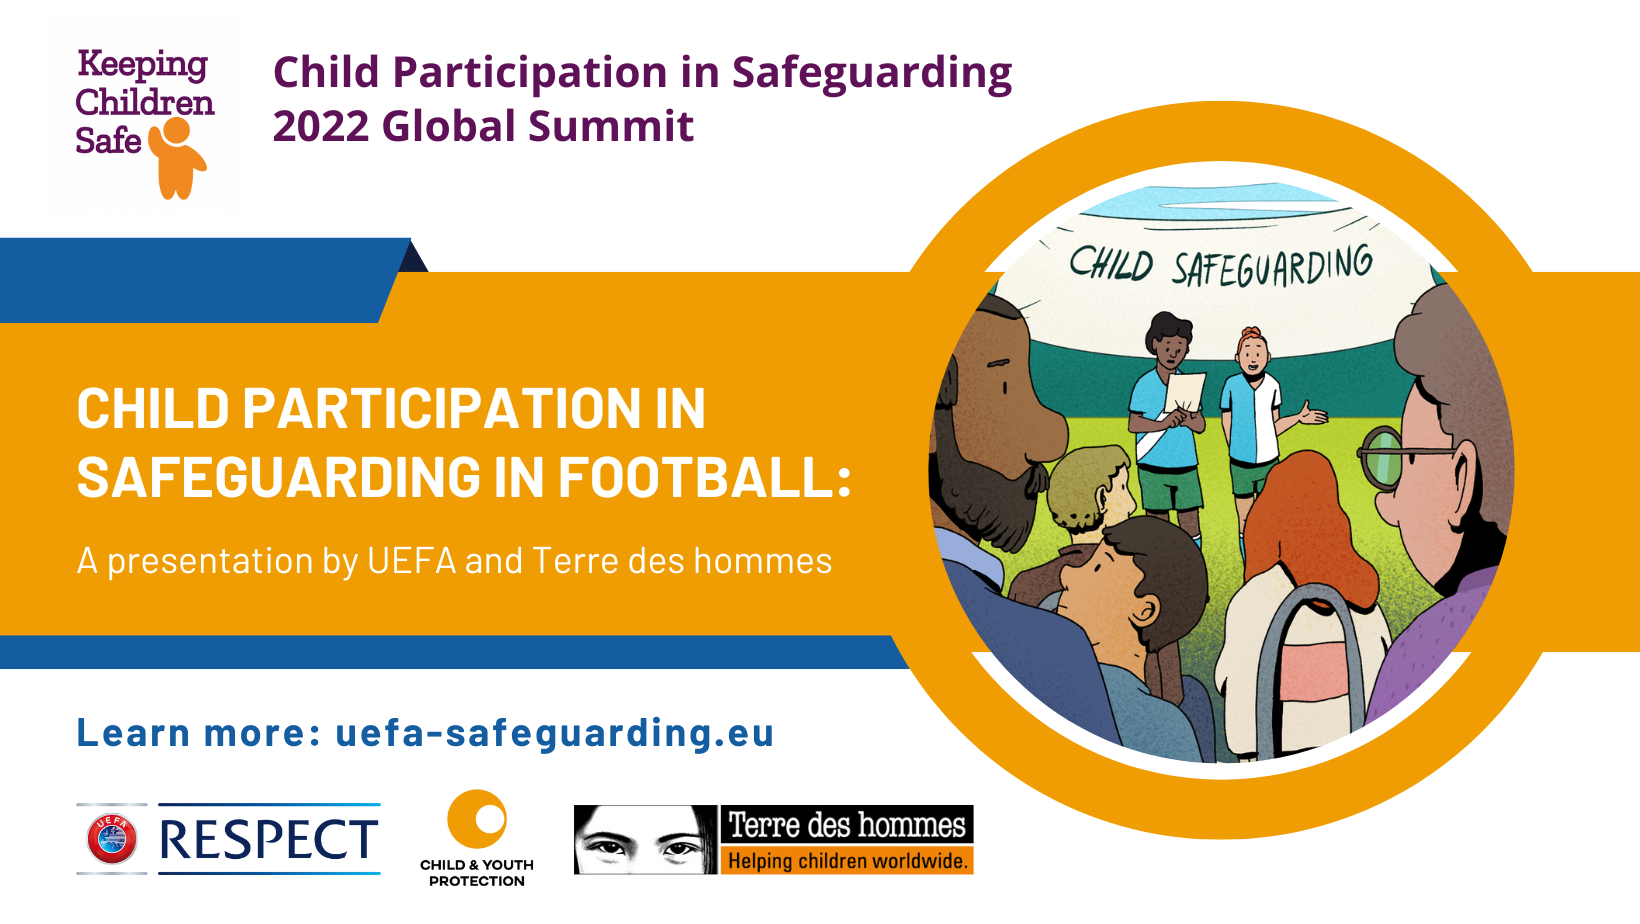 UEFA and Terre des hommes Talk at Child Participation in Safeguarding 2022 Global Summit